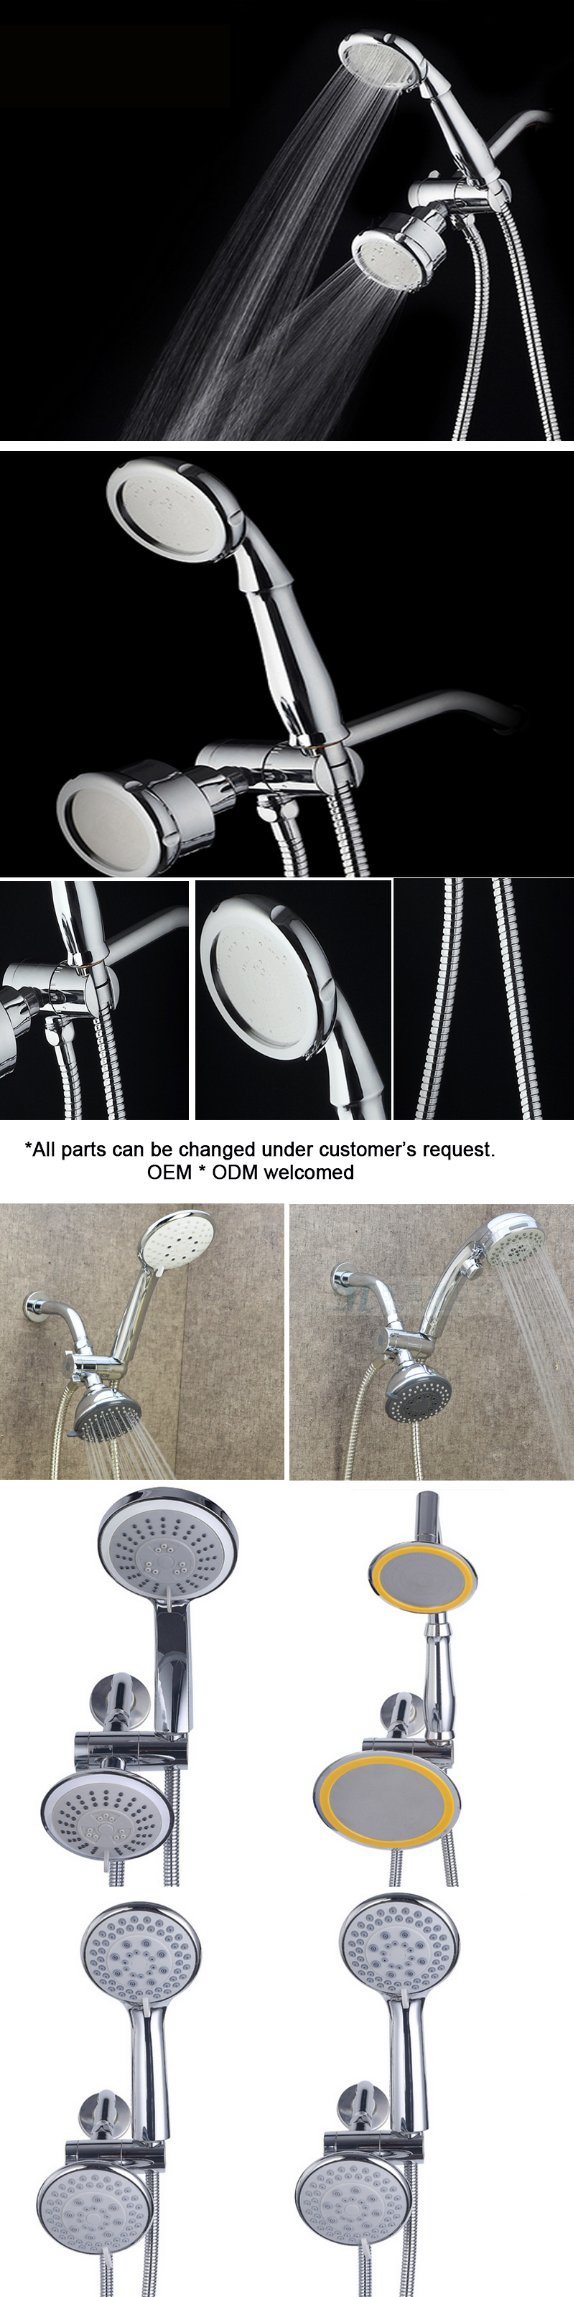 8 X 8 Function American Standard Combo Shower Set 3-Way High Pressure Hand Held Showerhead with Flexible 15 Inch Hose Chrome Finish